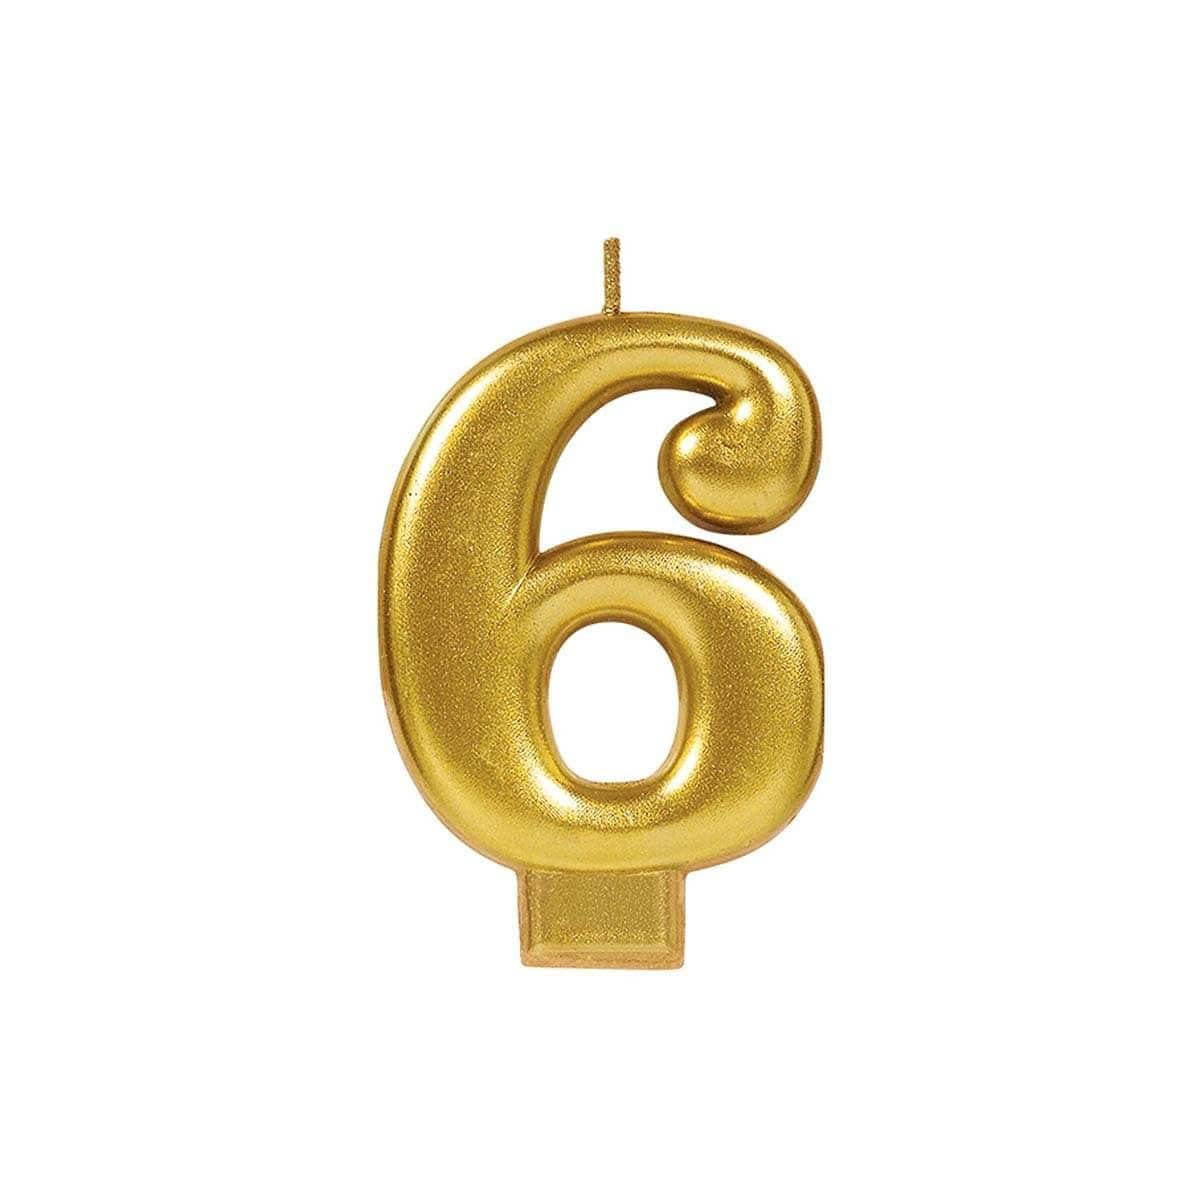 Buy Cake Supplies Metallic Numeral Candle #6 Gold sold at Party Expert